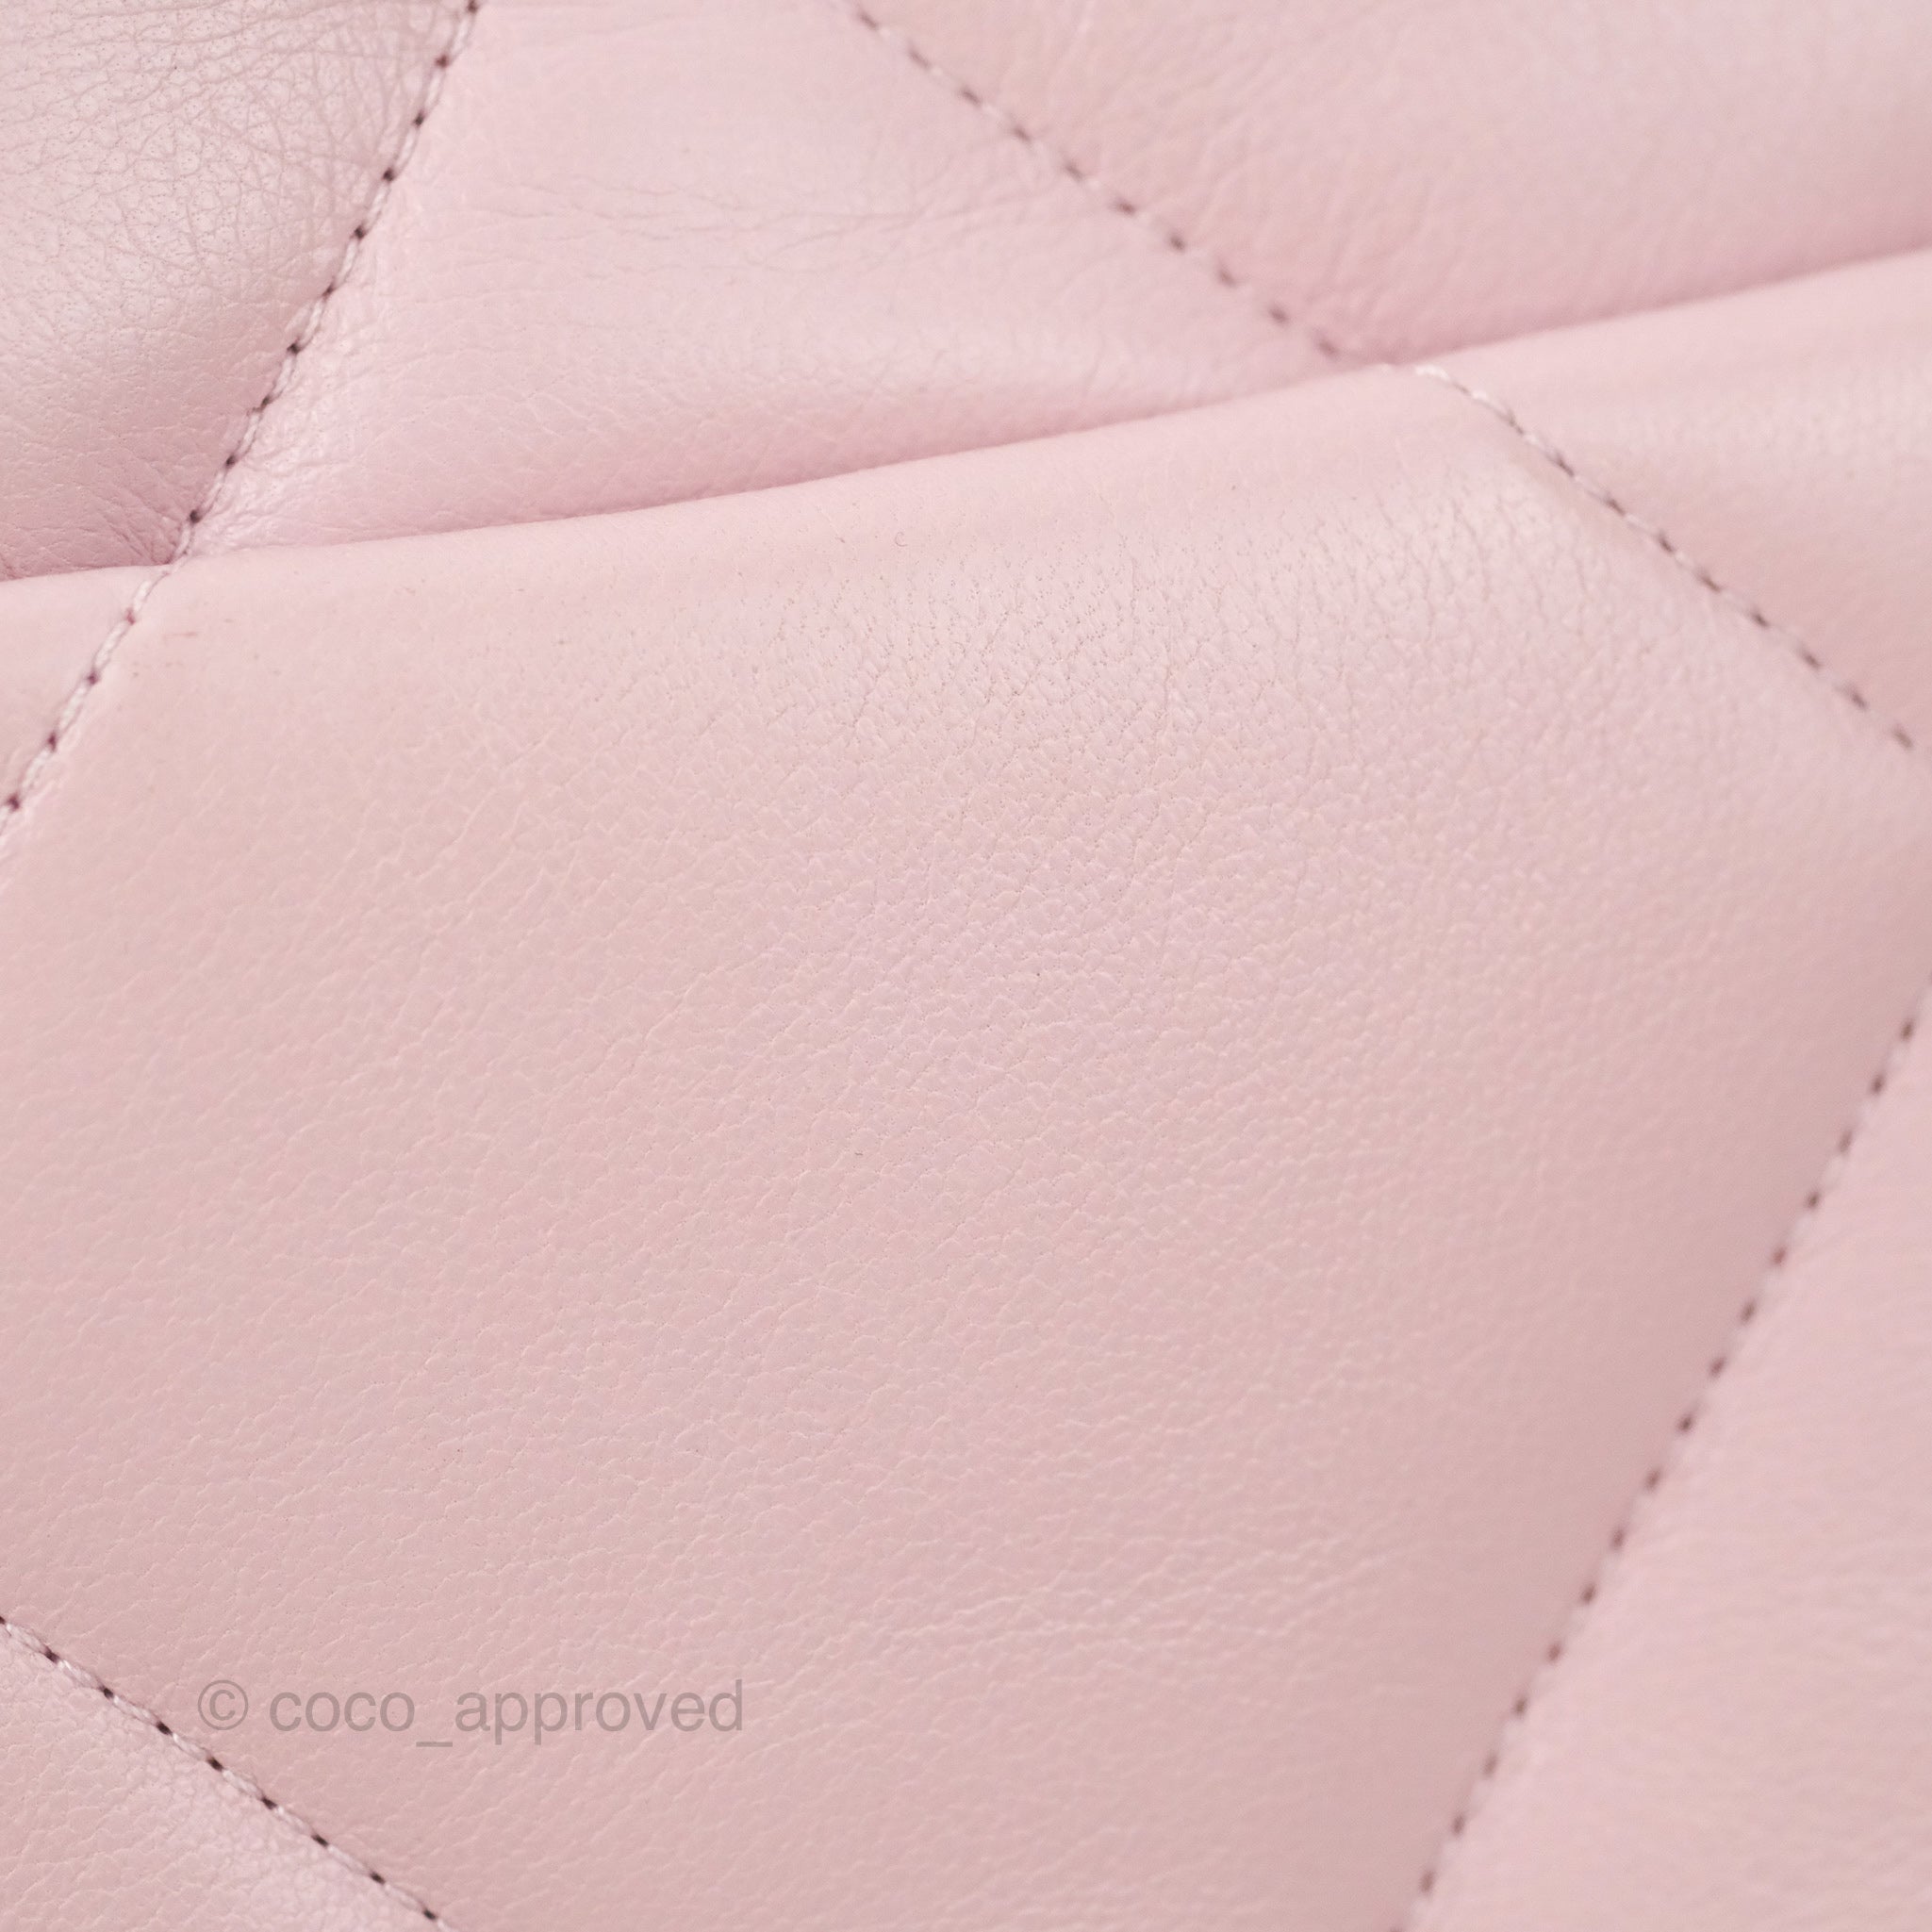 Louis Vuitton White/Rose Clair Iridescent Technical Fabric/Leather